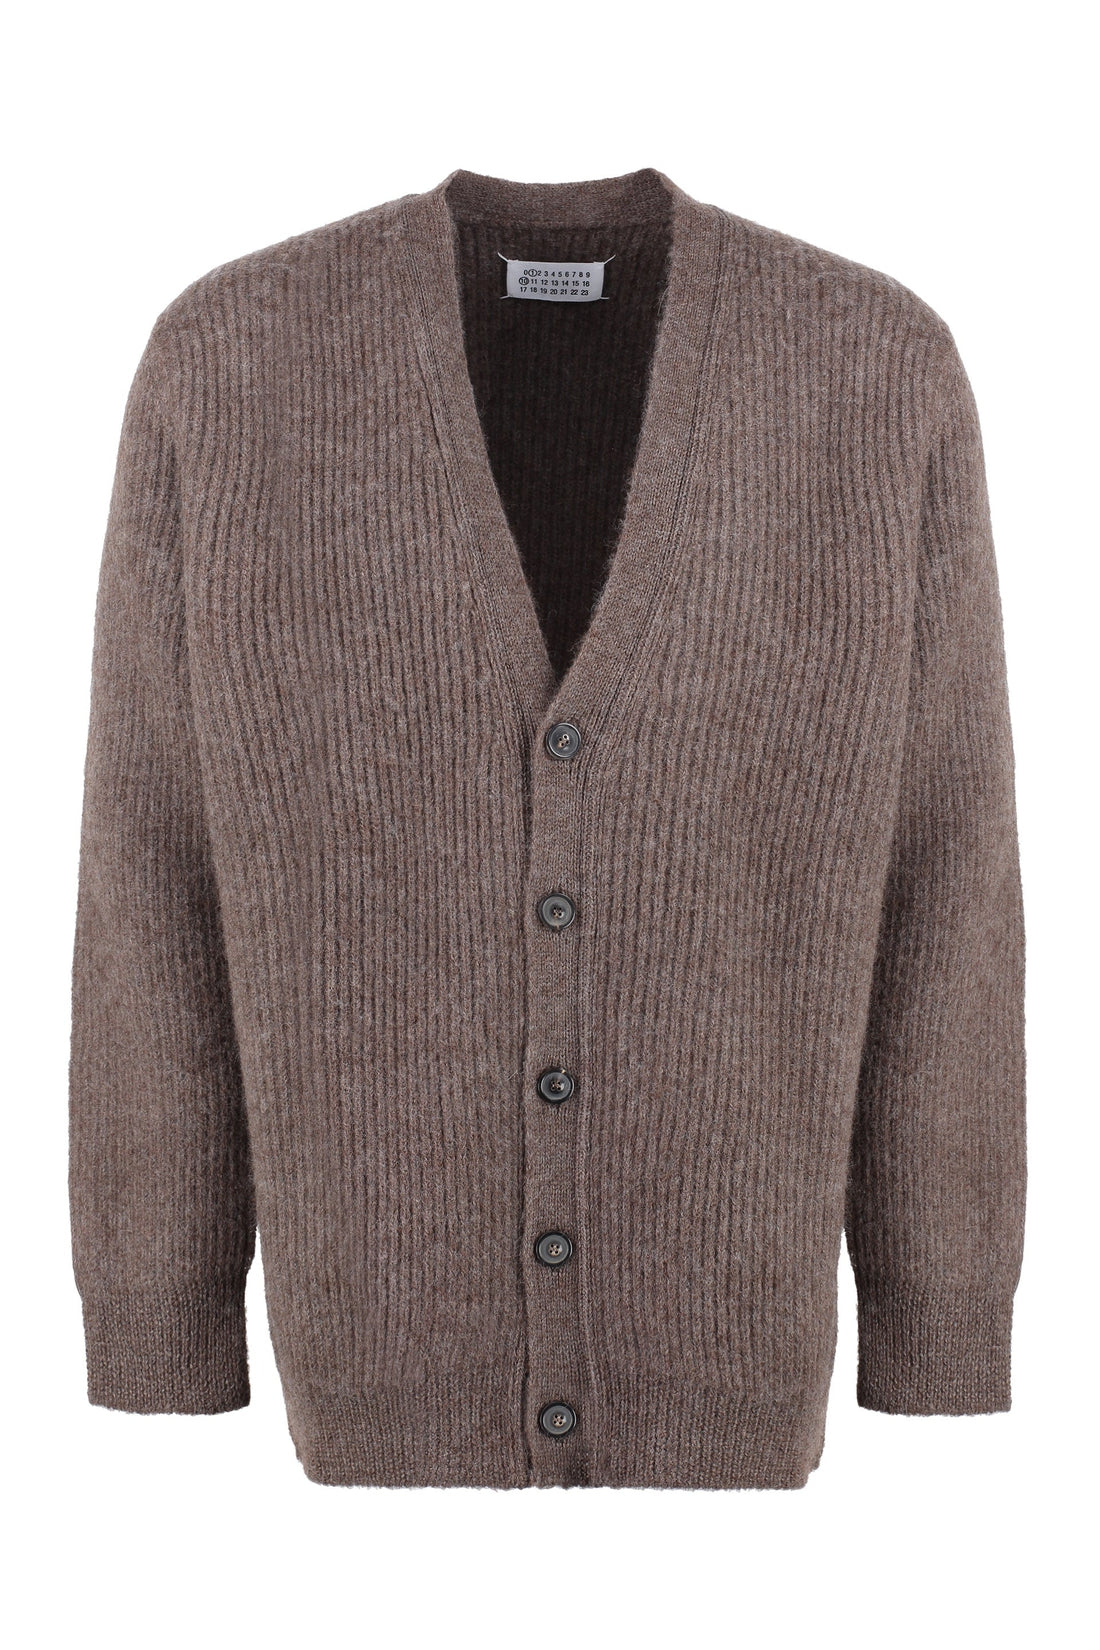 Maison Margiela-OUTLET-SALE-Cardigan in wool and alpaca-ARCHIVIST